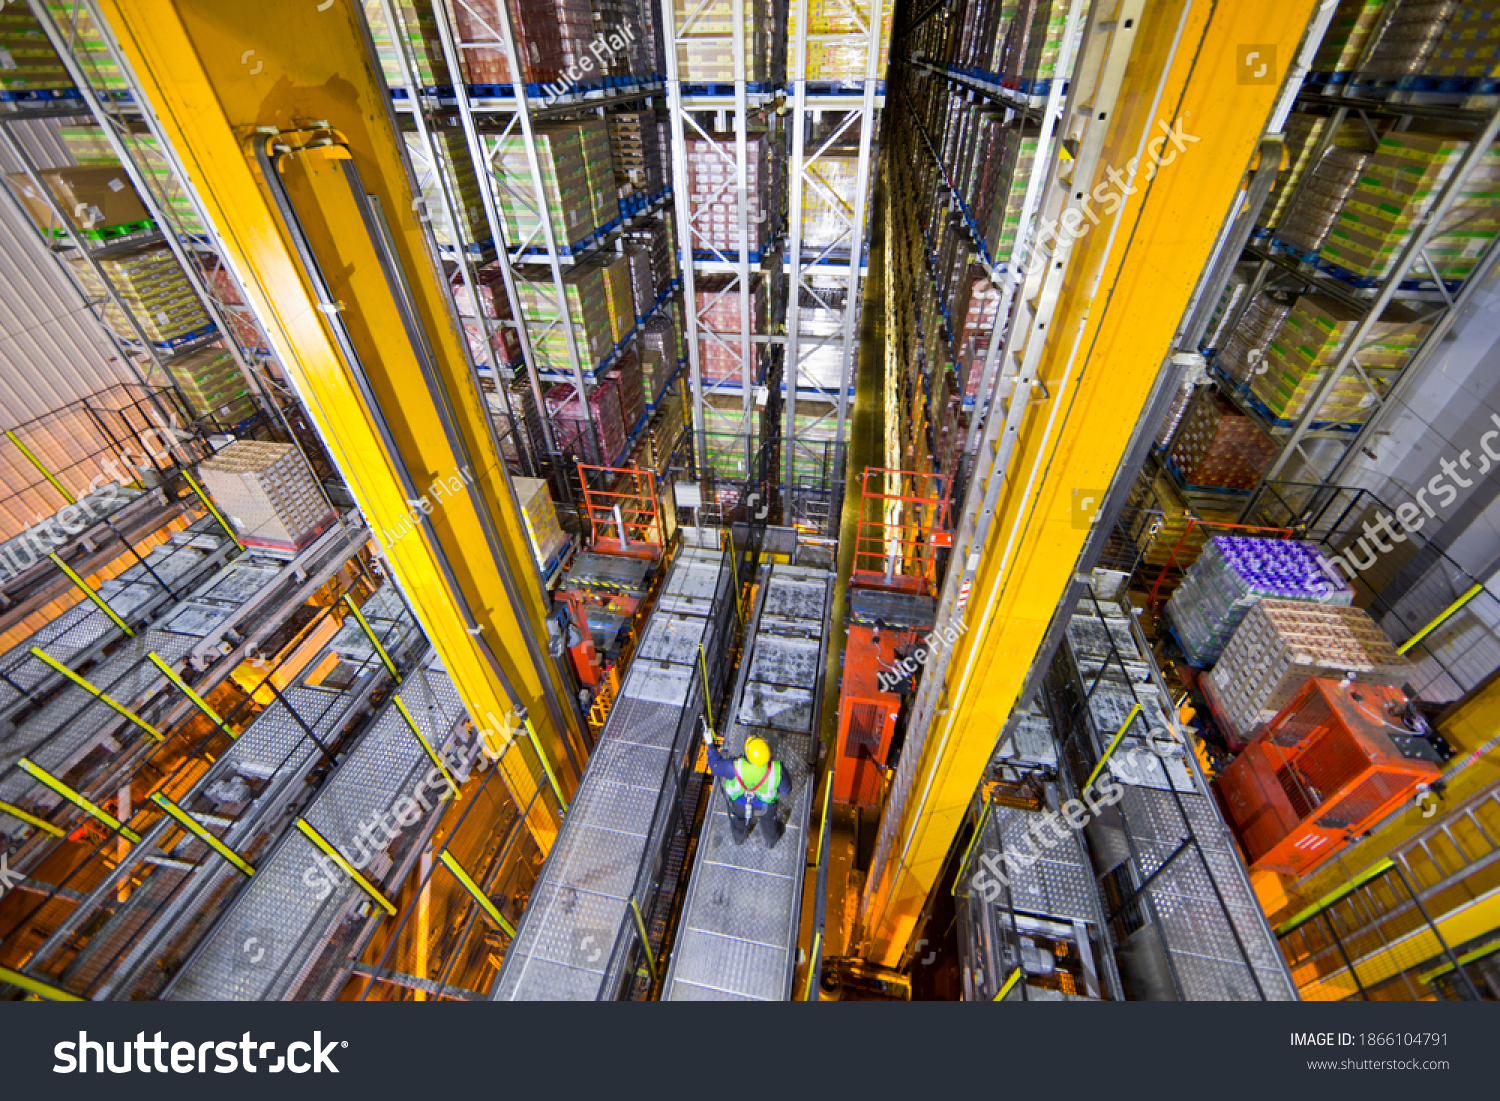 Wide shot of a worker standing below foodstuff merchandise stored in a warehouse with an automated storage and retrieval system  #1866104791